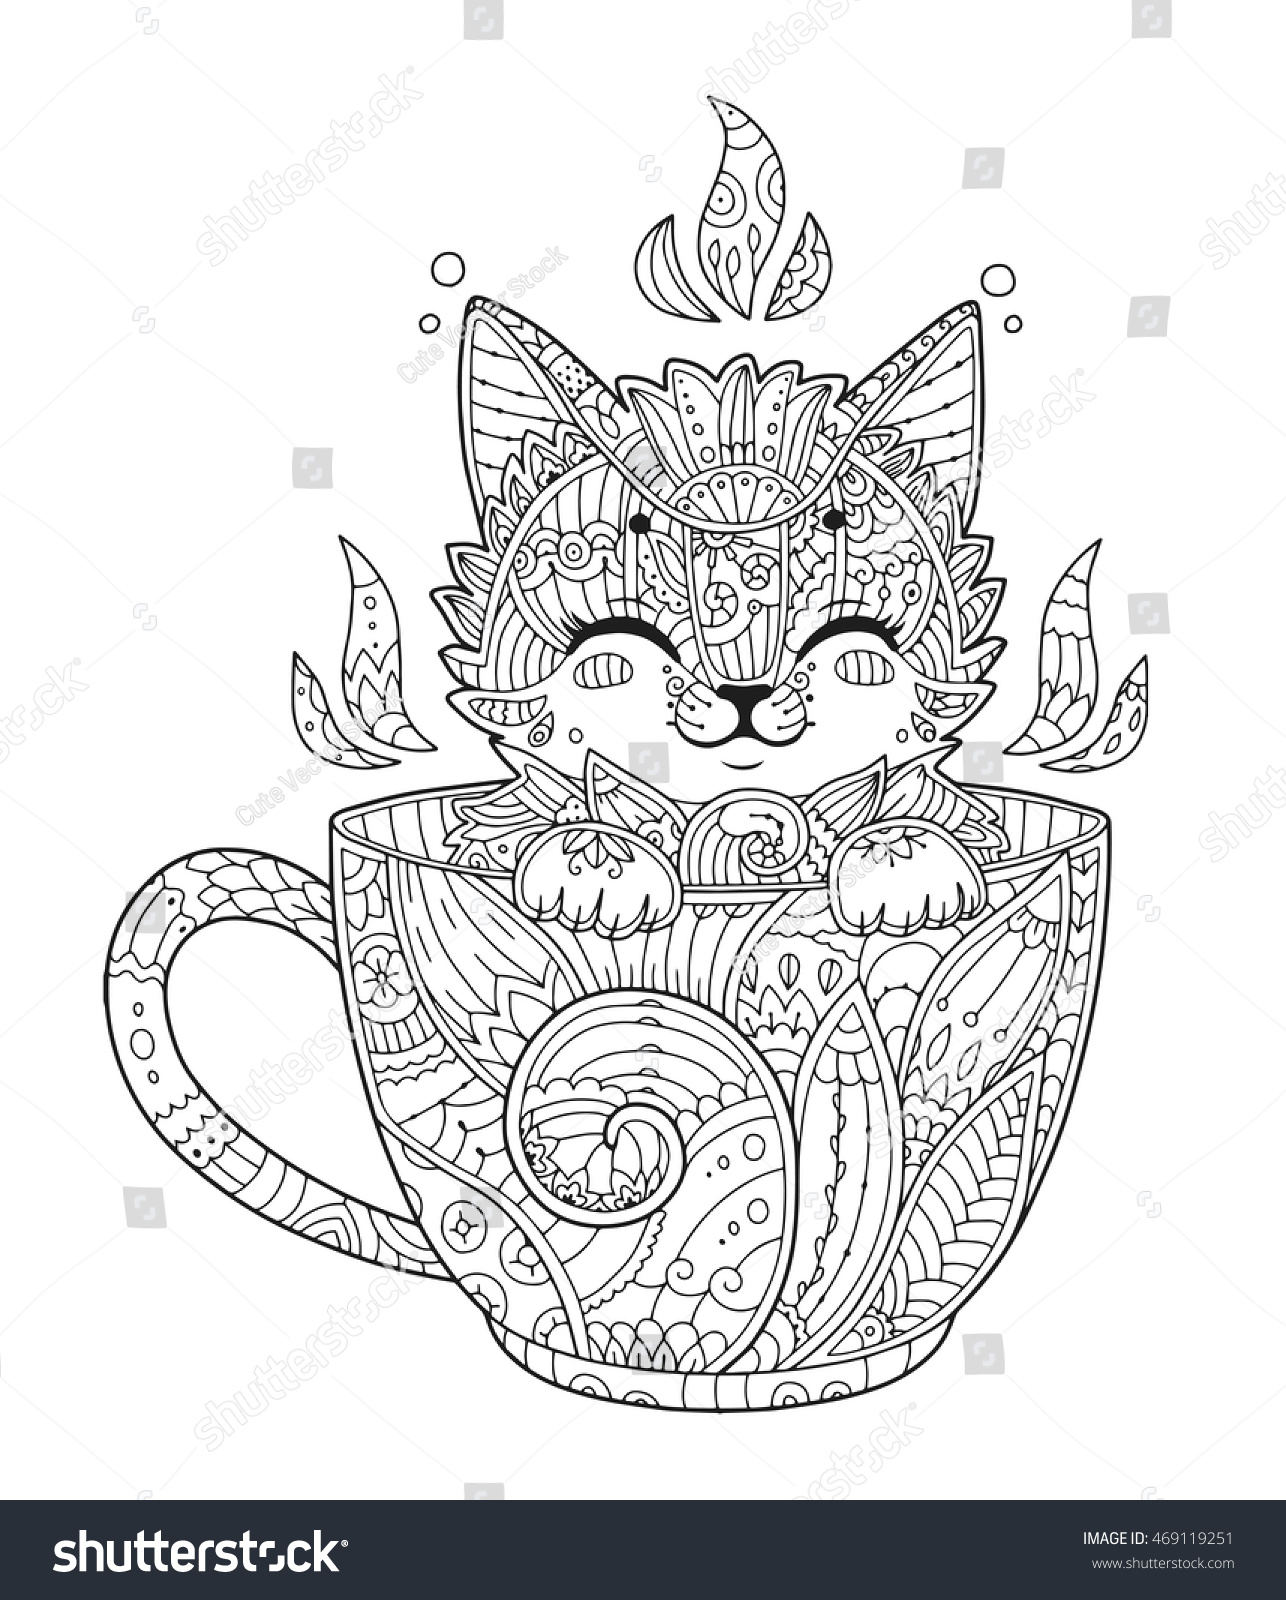 Kitten Cat Coloring Pages For Adults / Top 15 Free Printable Kitten